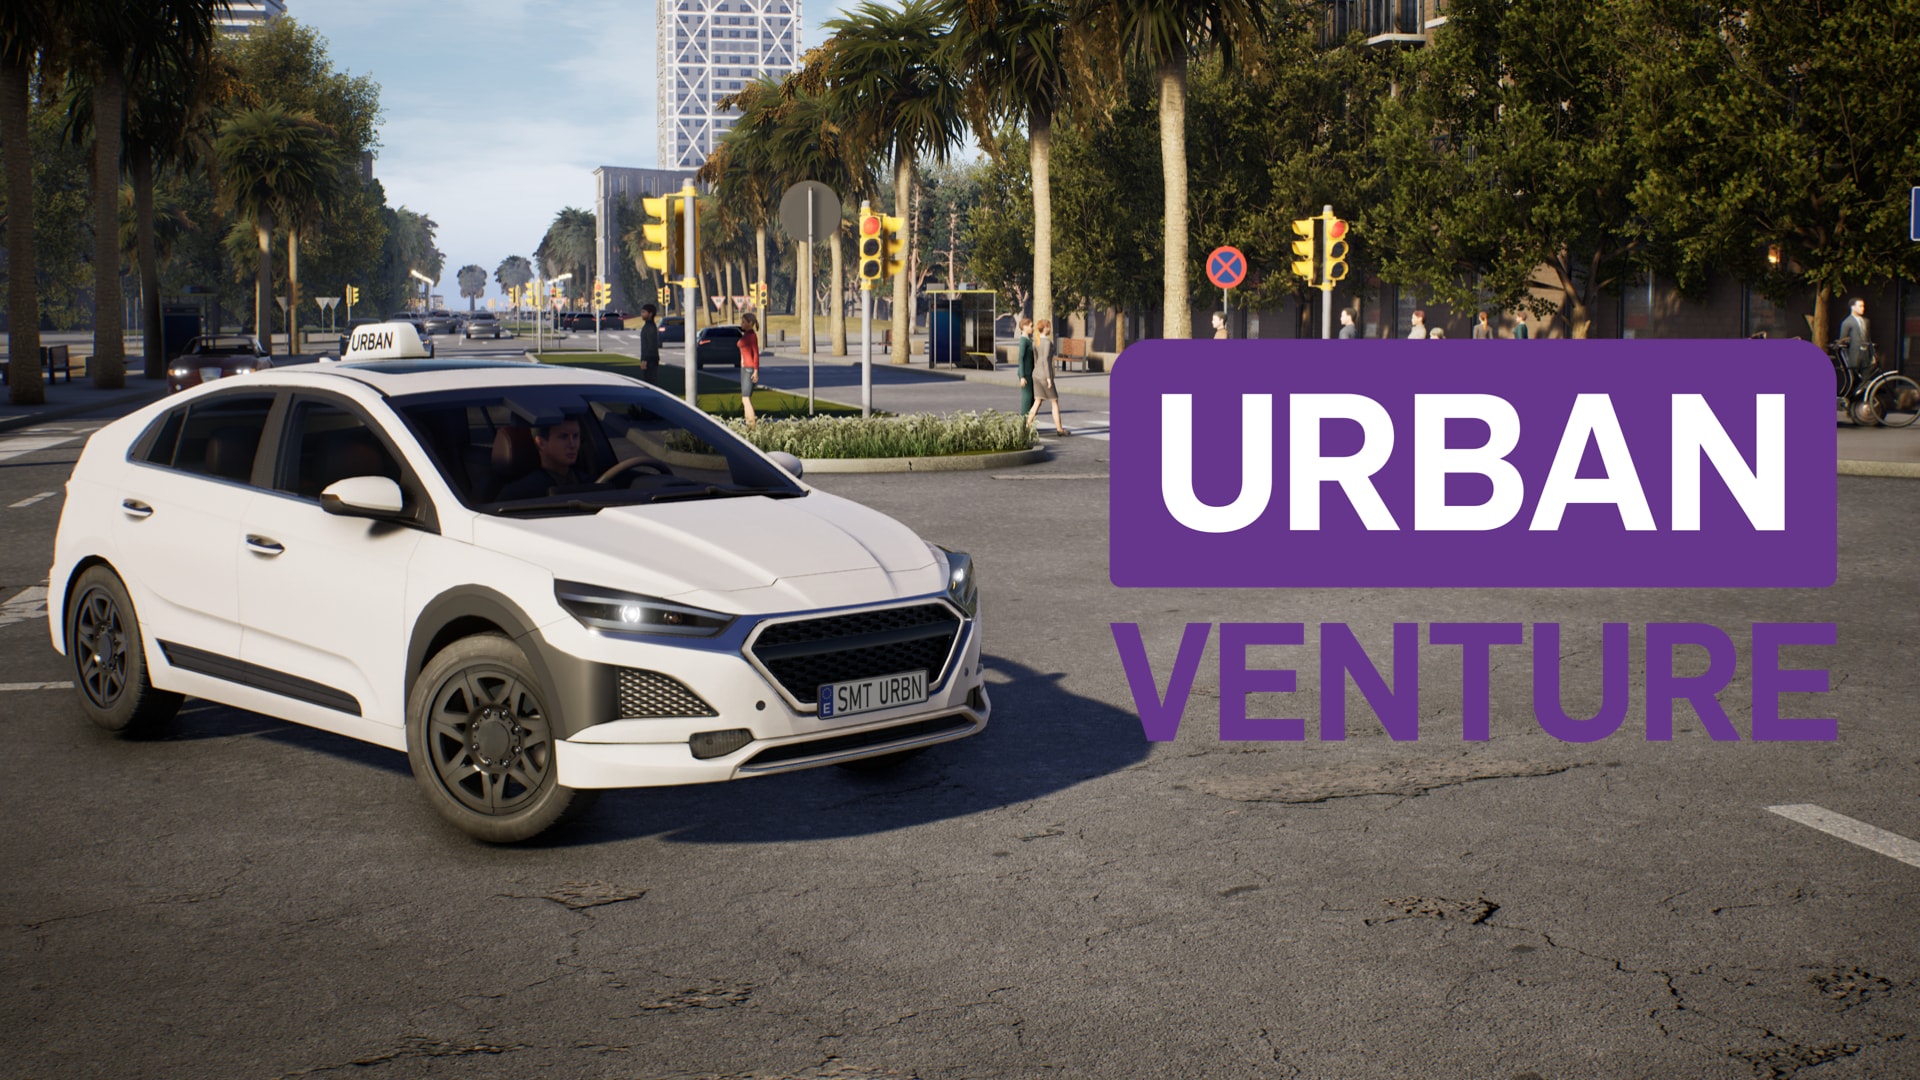 Urban Venture Claims To Be The First